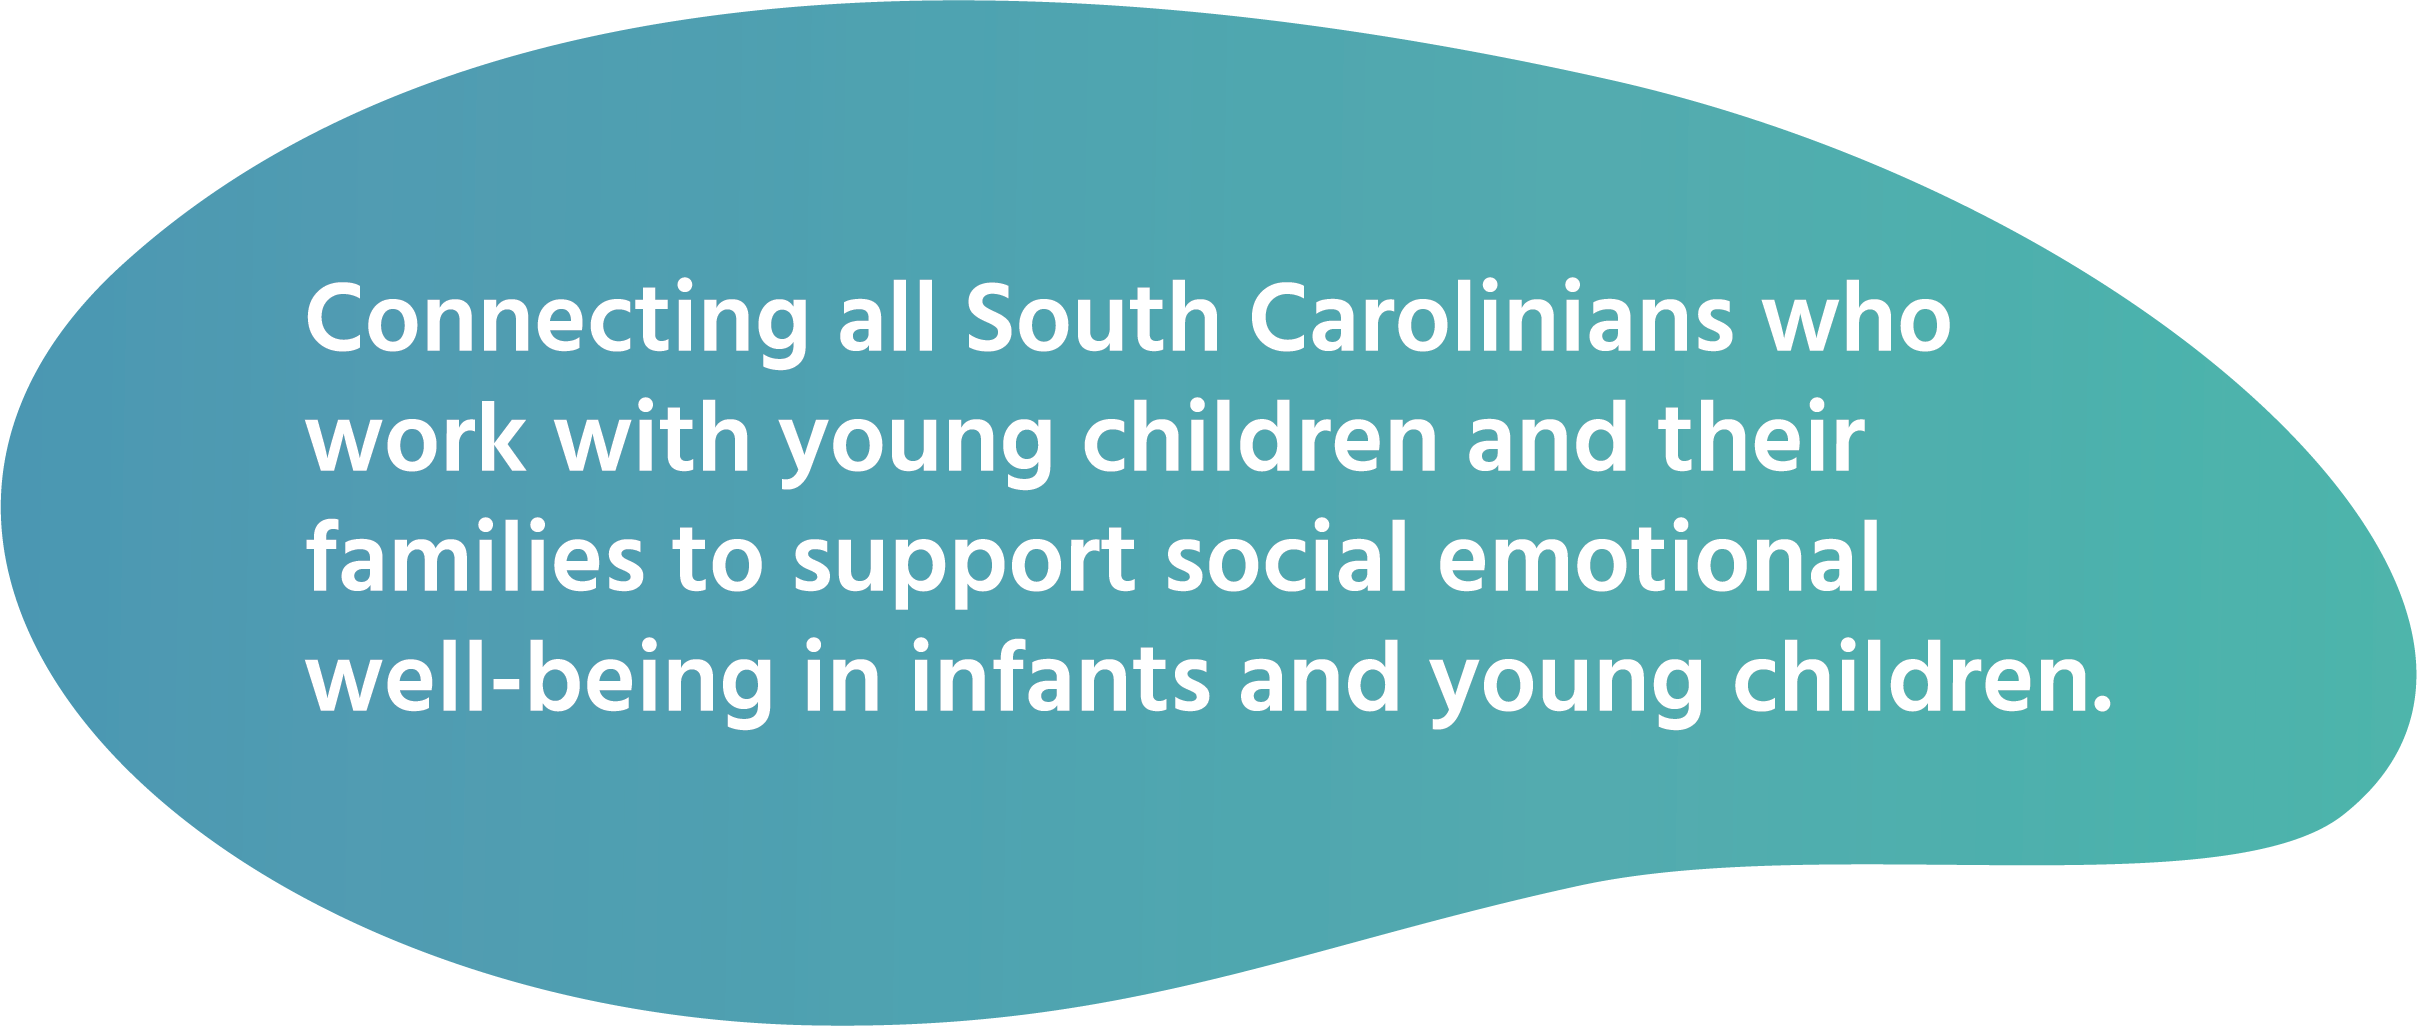 infographic: Connecting all South Carolinians who work with young children and their families to support social emotional well-being in infants and young children.